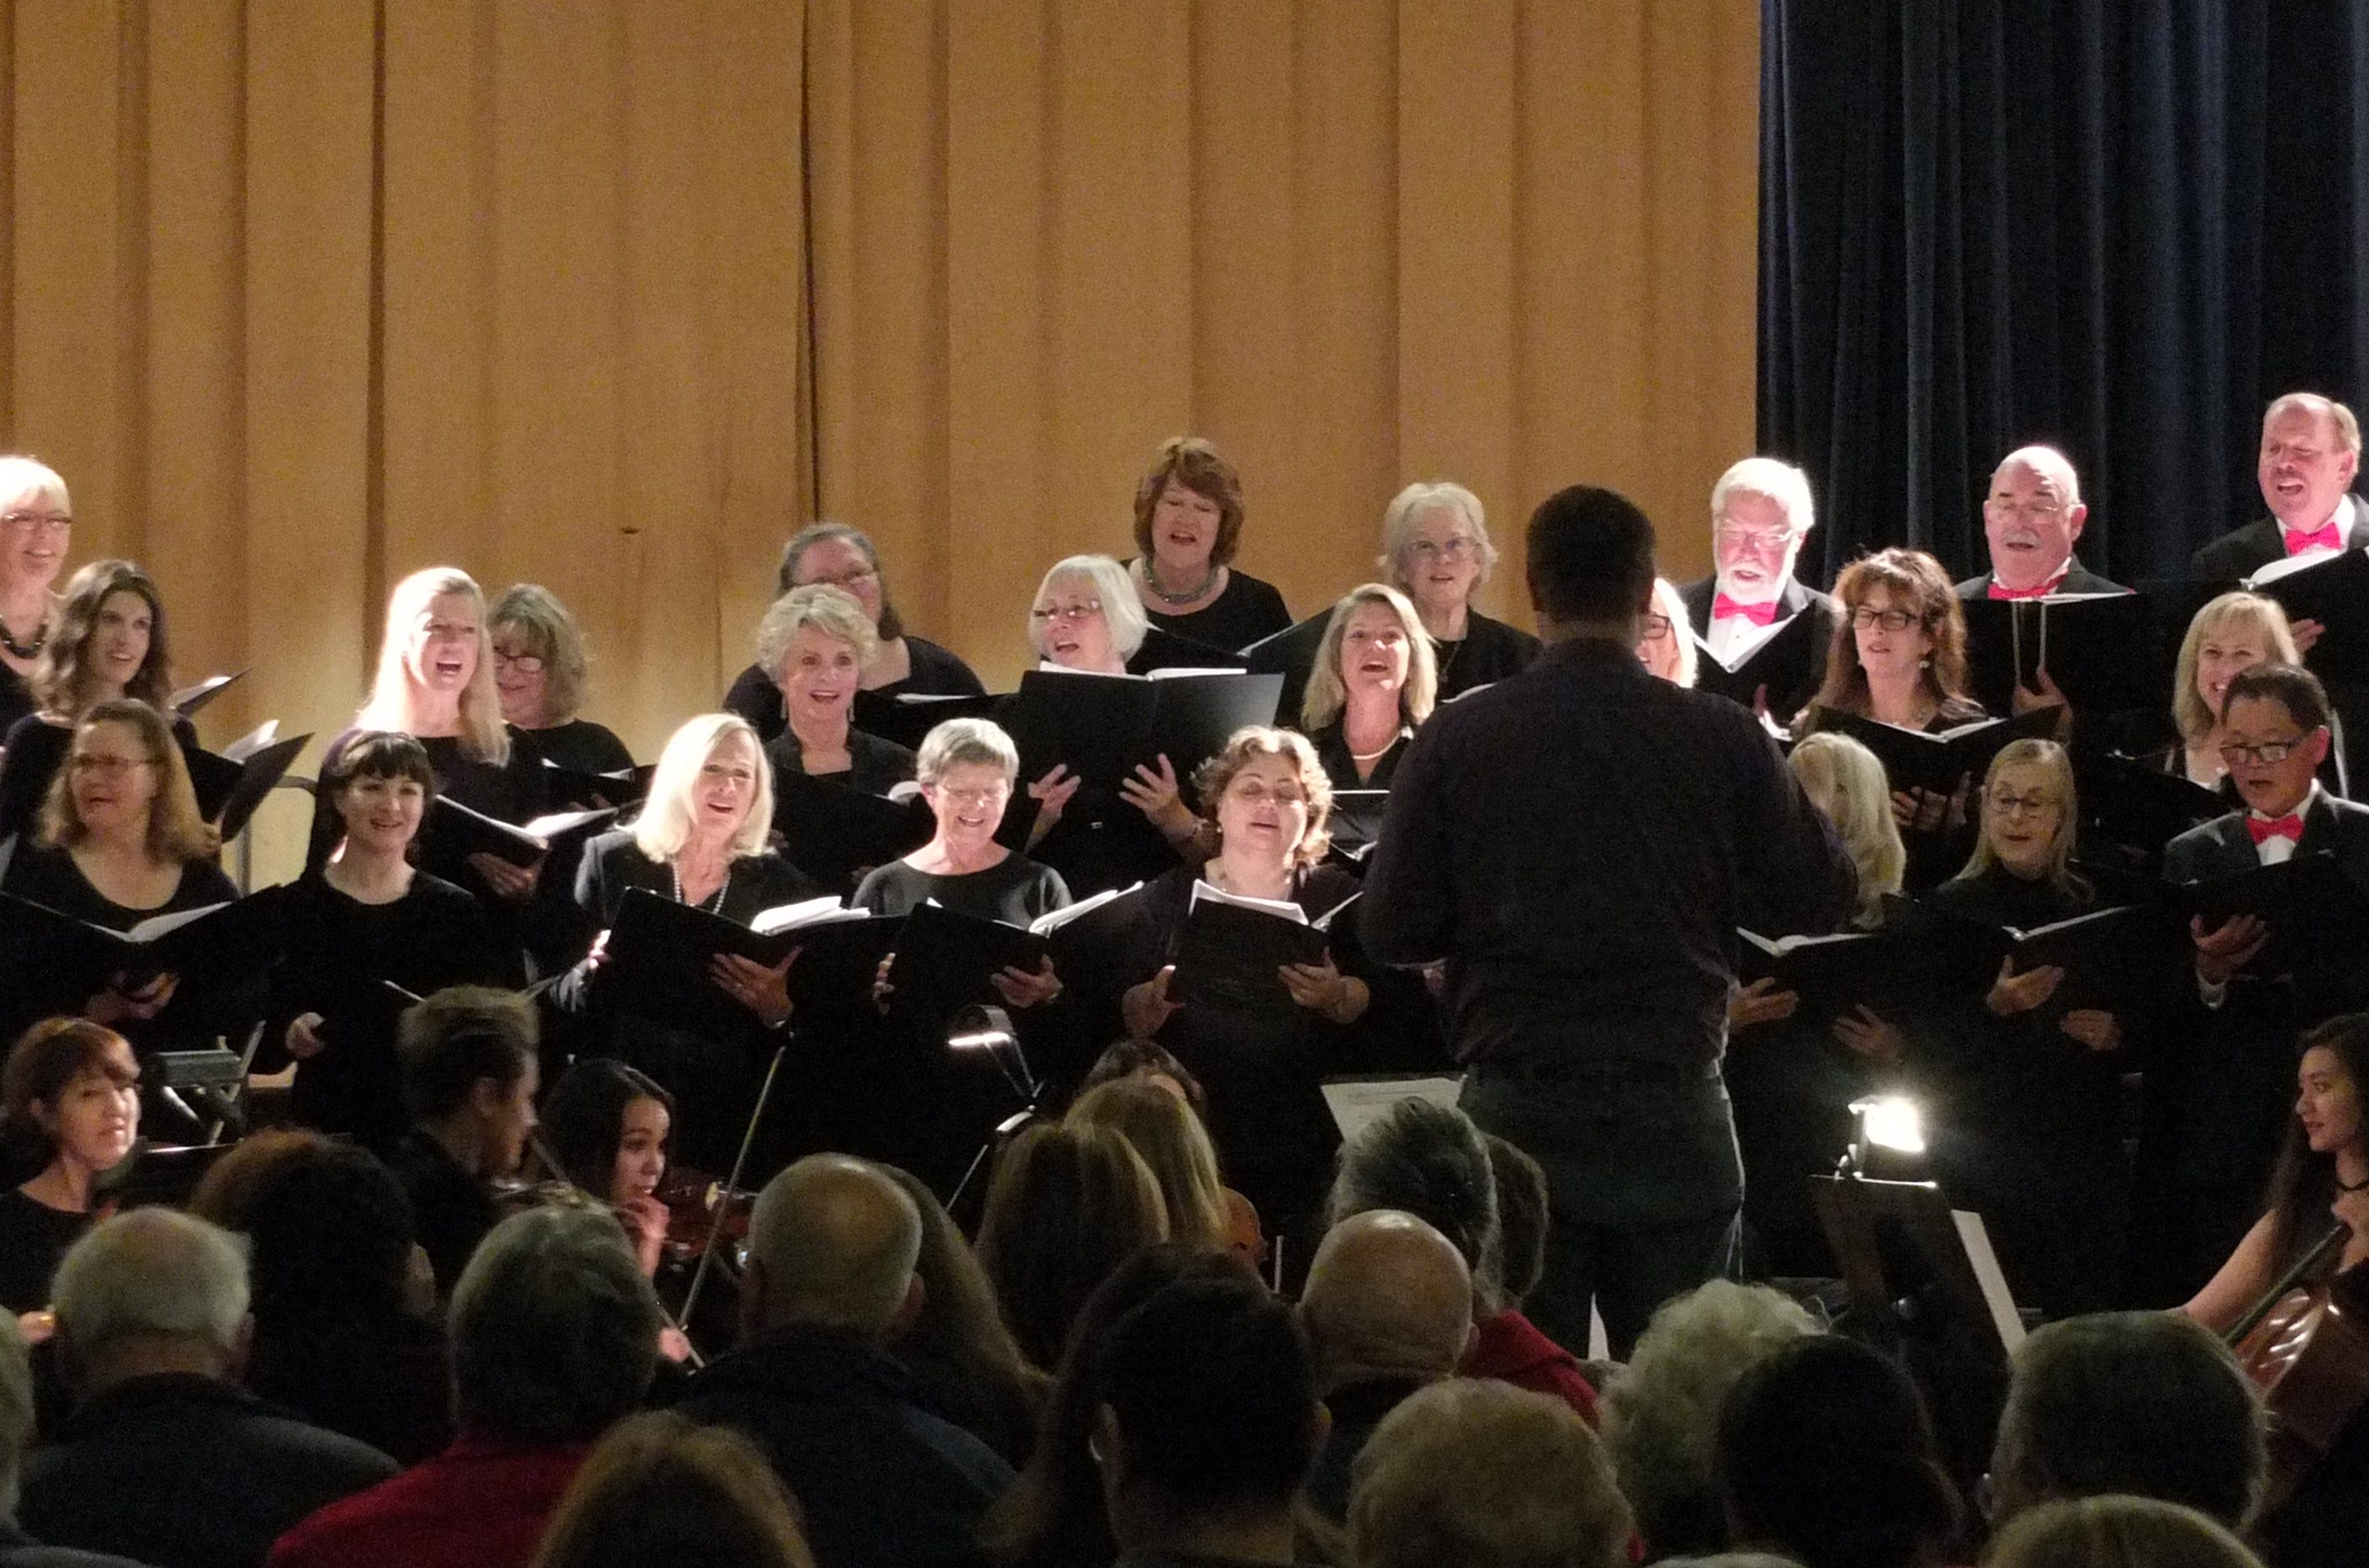 Valley chorale to present ‘Festival of Carols’ Dec. 16-17